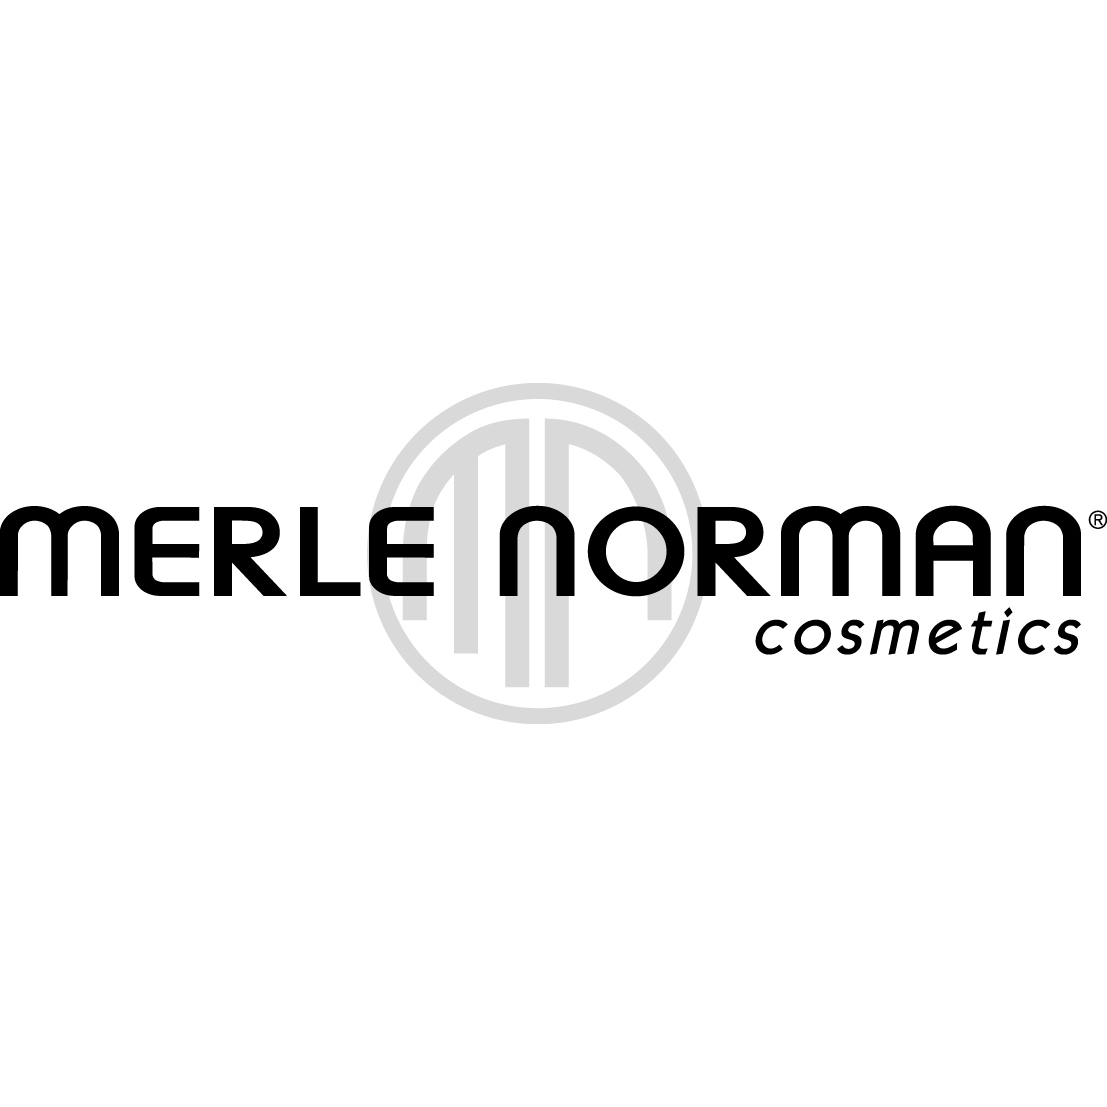 Merle Norman Cosmetics; Antioch, IL Merle Norman Cosmetics, Wigs and Boutique Antioch (224)788-8820